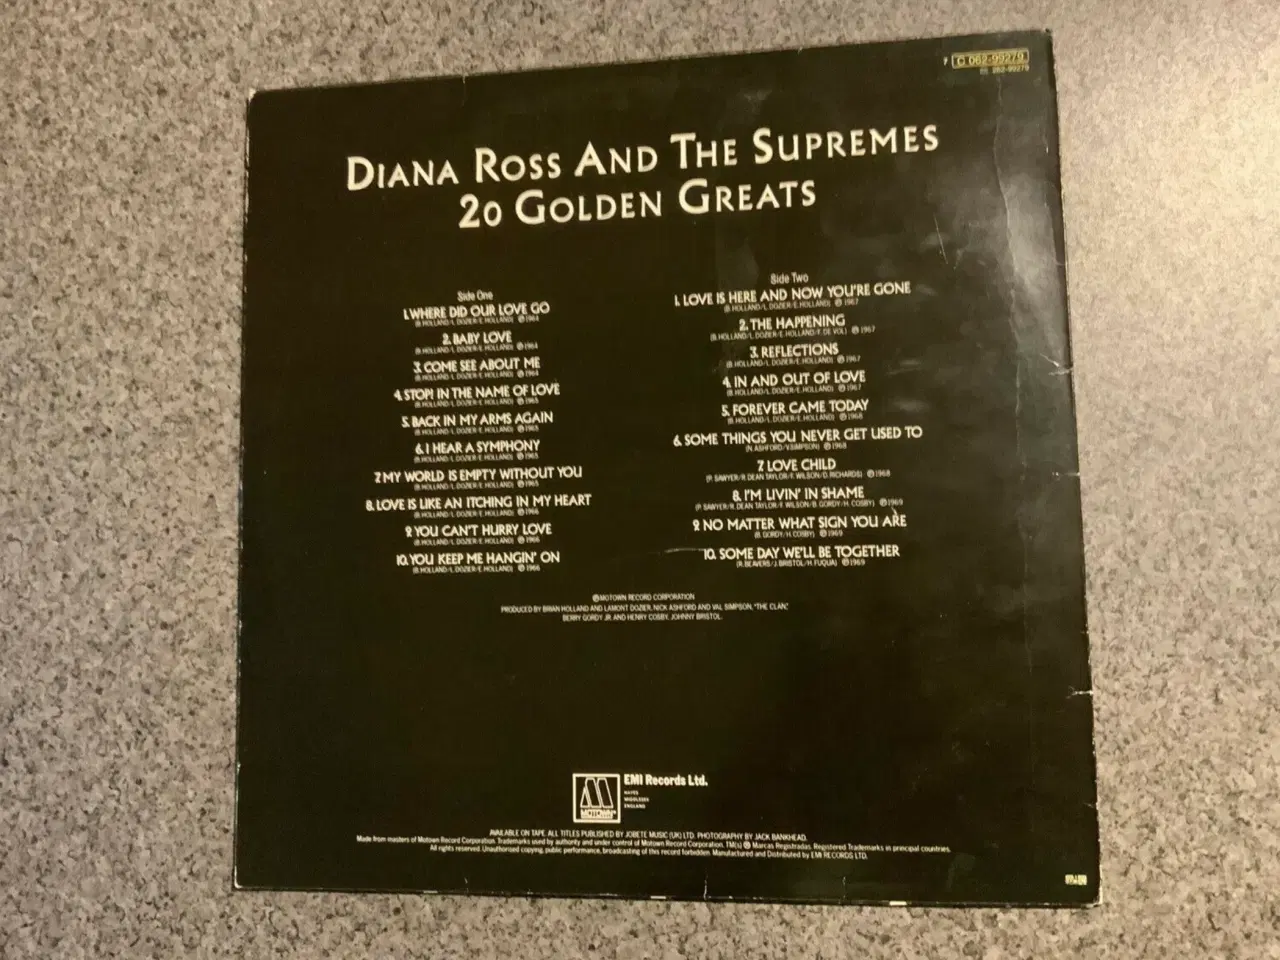 Billede 2 - LP:  Diana Ross and The Supremes 